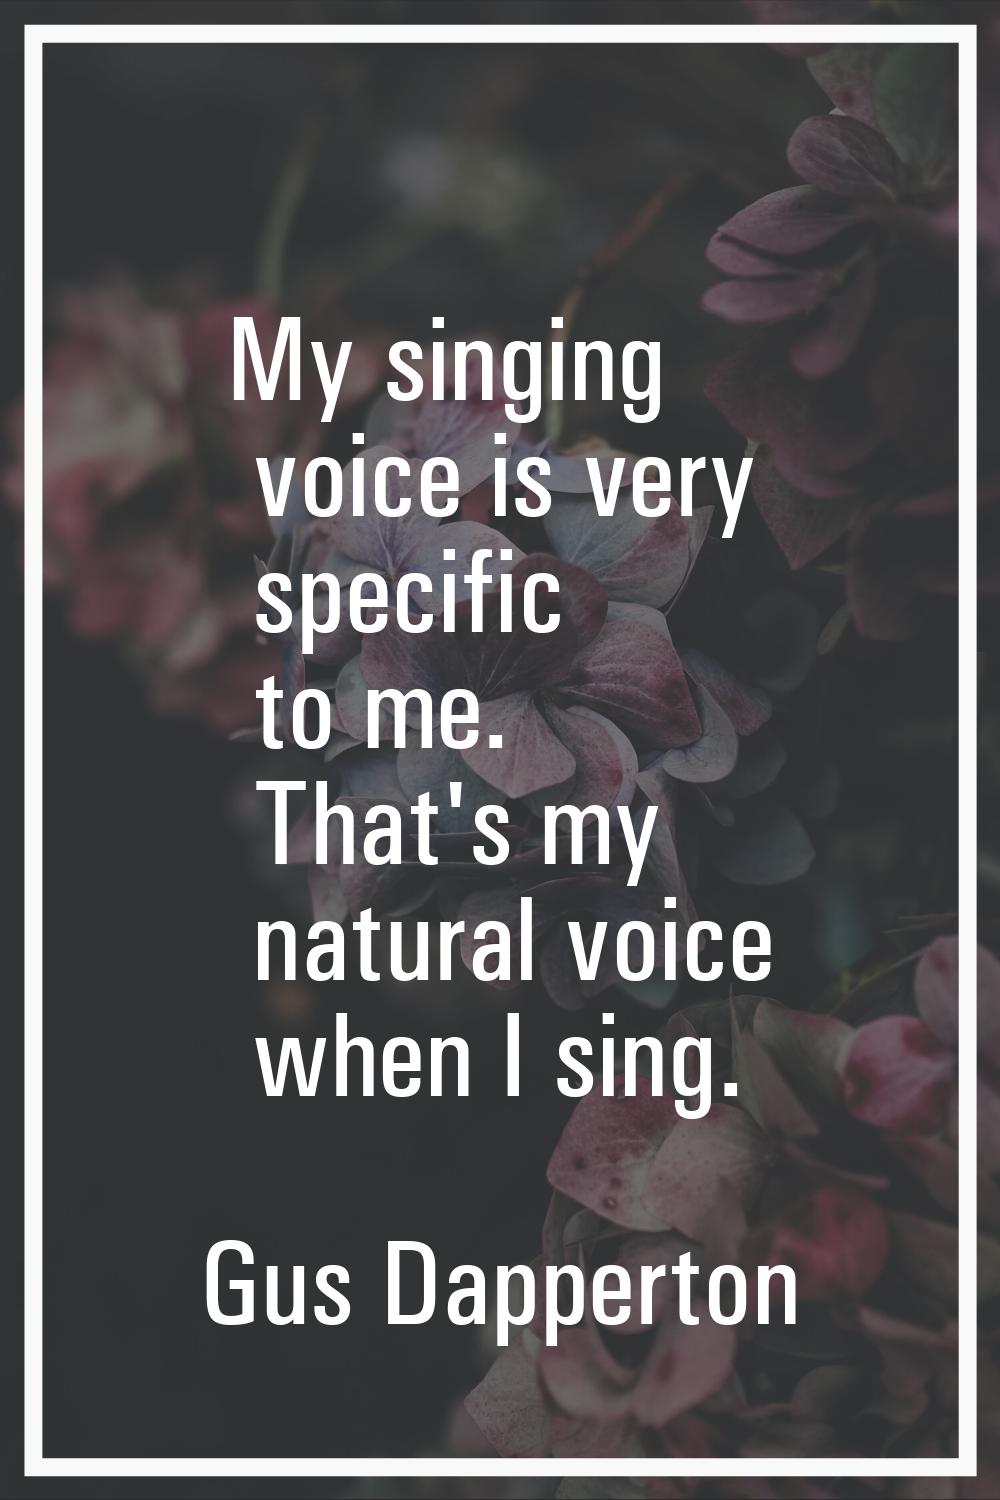 My singing voice is very specific to me. That's my natural voice when I sing.